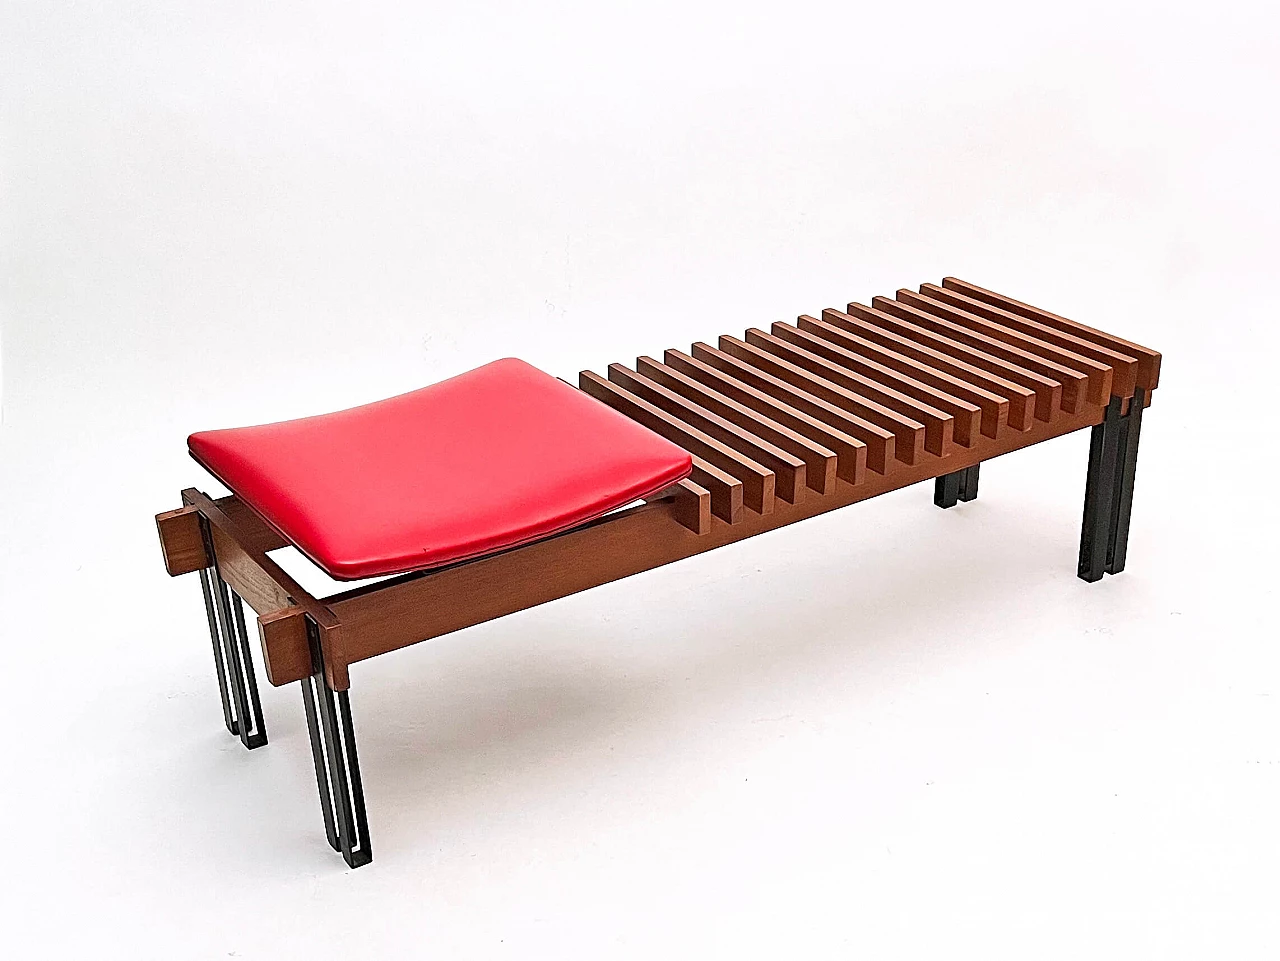 Teak and steel bench with skai seat by Inge and Luciano Rubino for APEC, 1960s 4